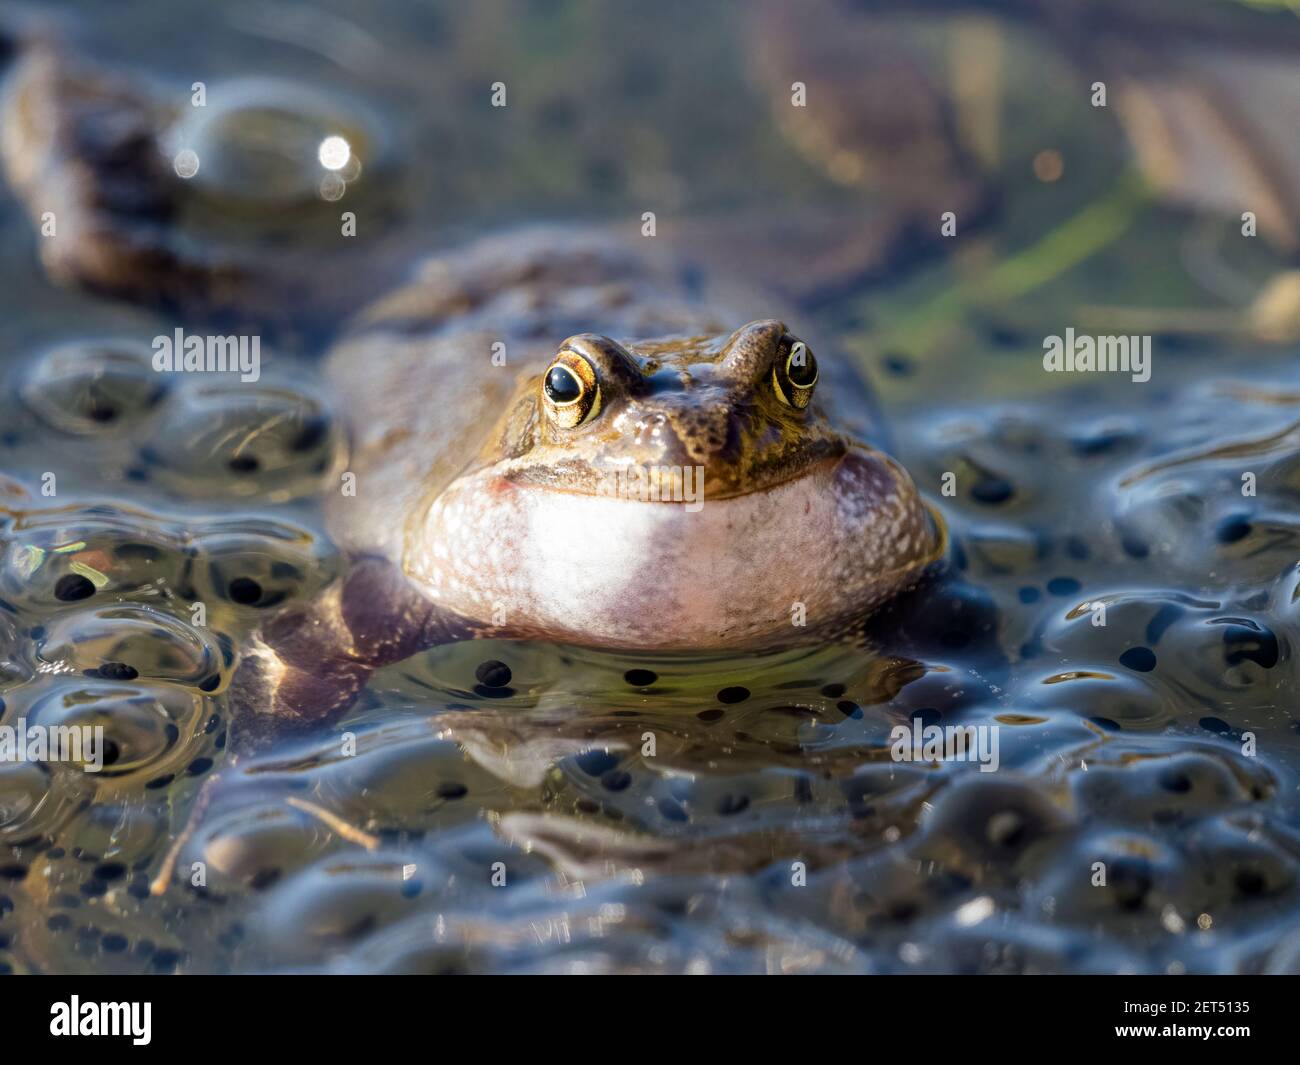 Aberystwyth, Ceredigion, Wales, UK. 01st March, 2021. Common frogs spawning on a warm, sunny St David's Day in a garden pond in mid Wales. . Credit: P Stock Photo